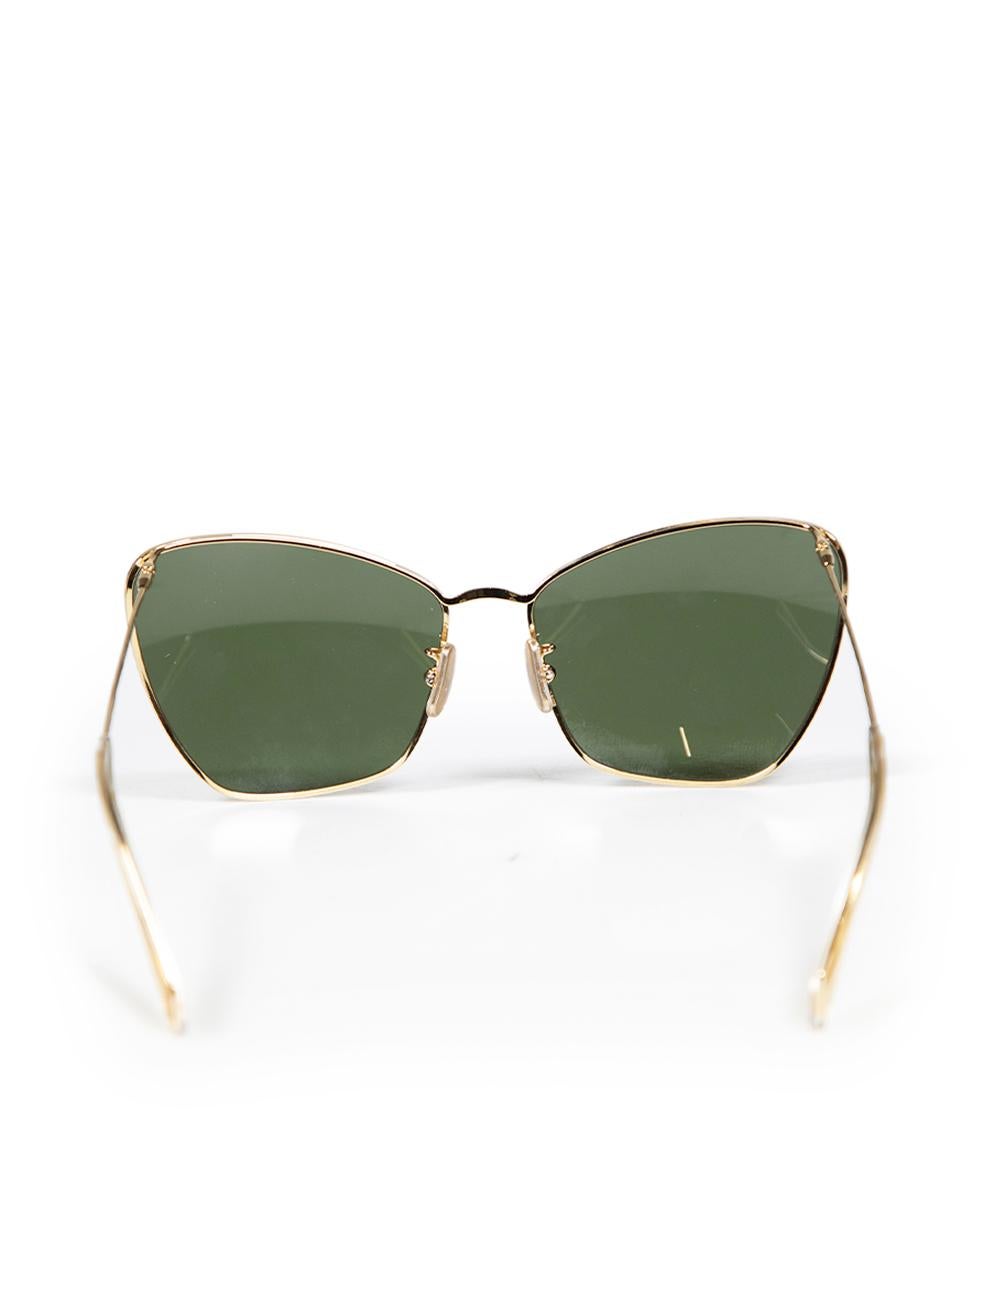 Céline Gold Frame Cat Eye Tinted Sunglasses In Excellent Condition For Sale In London, GB